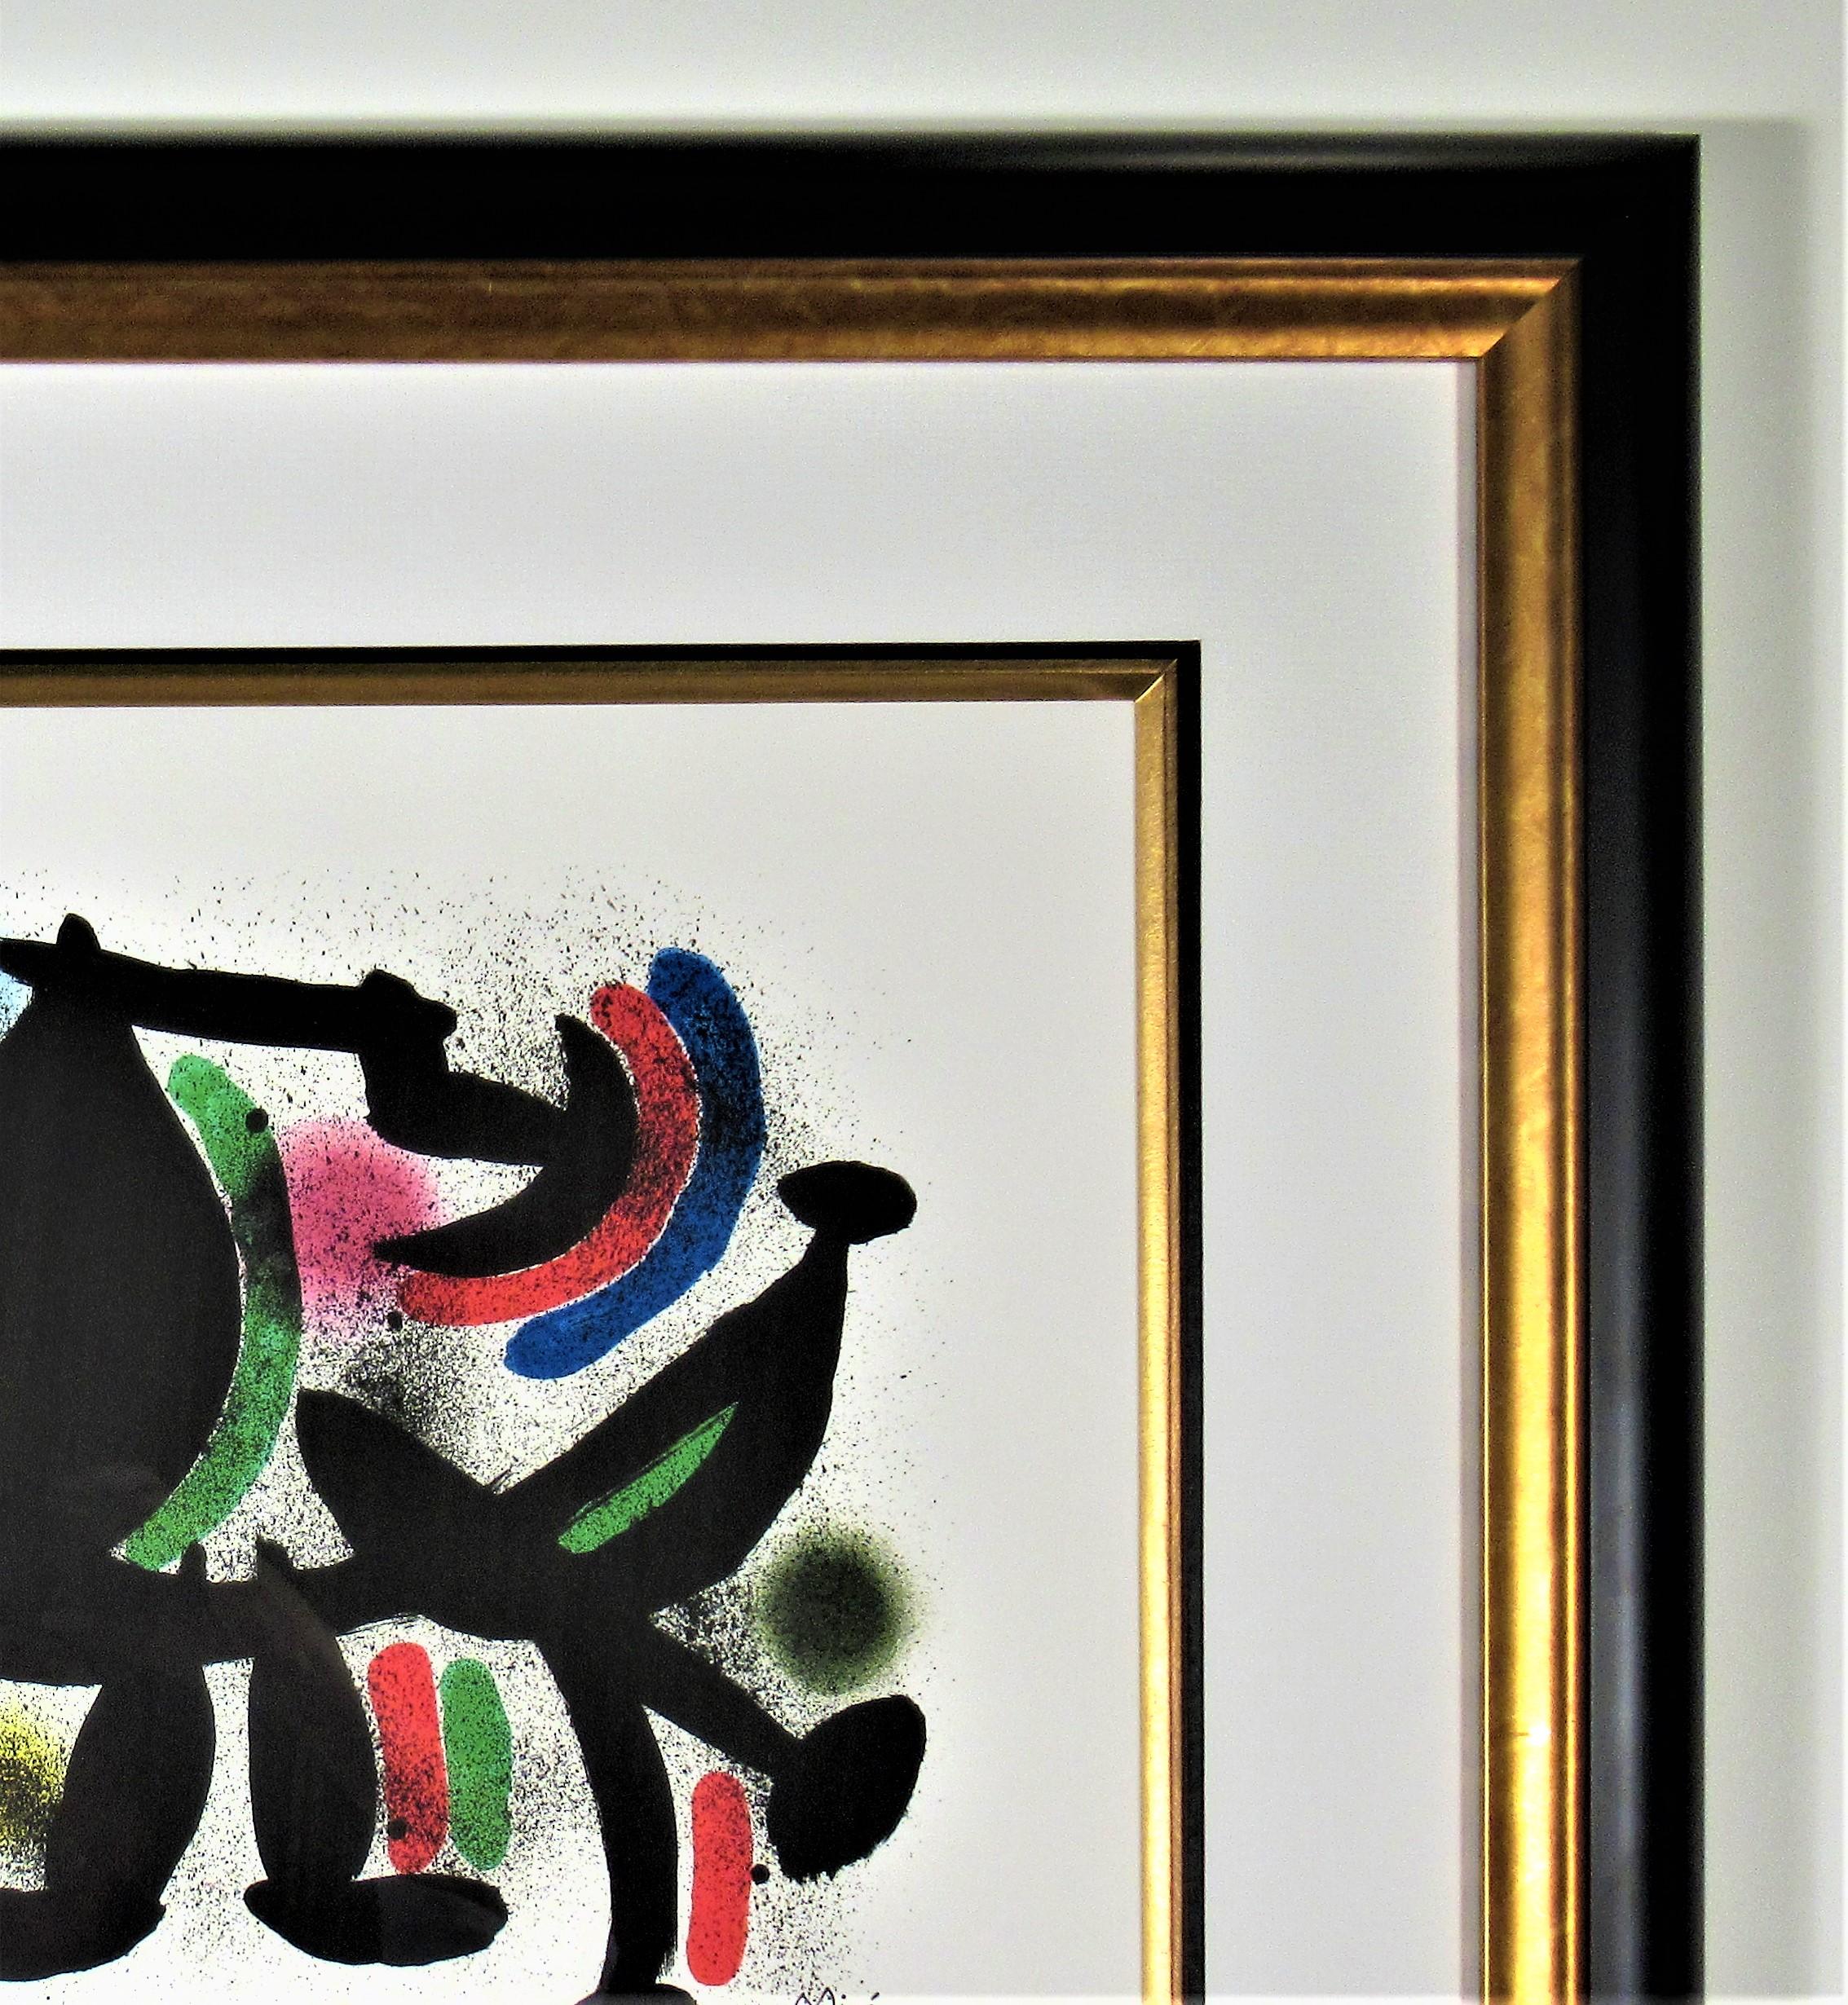 Miro Lithograph II - Abstract Print by (after) Joan Miró